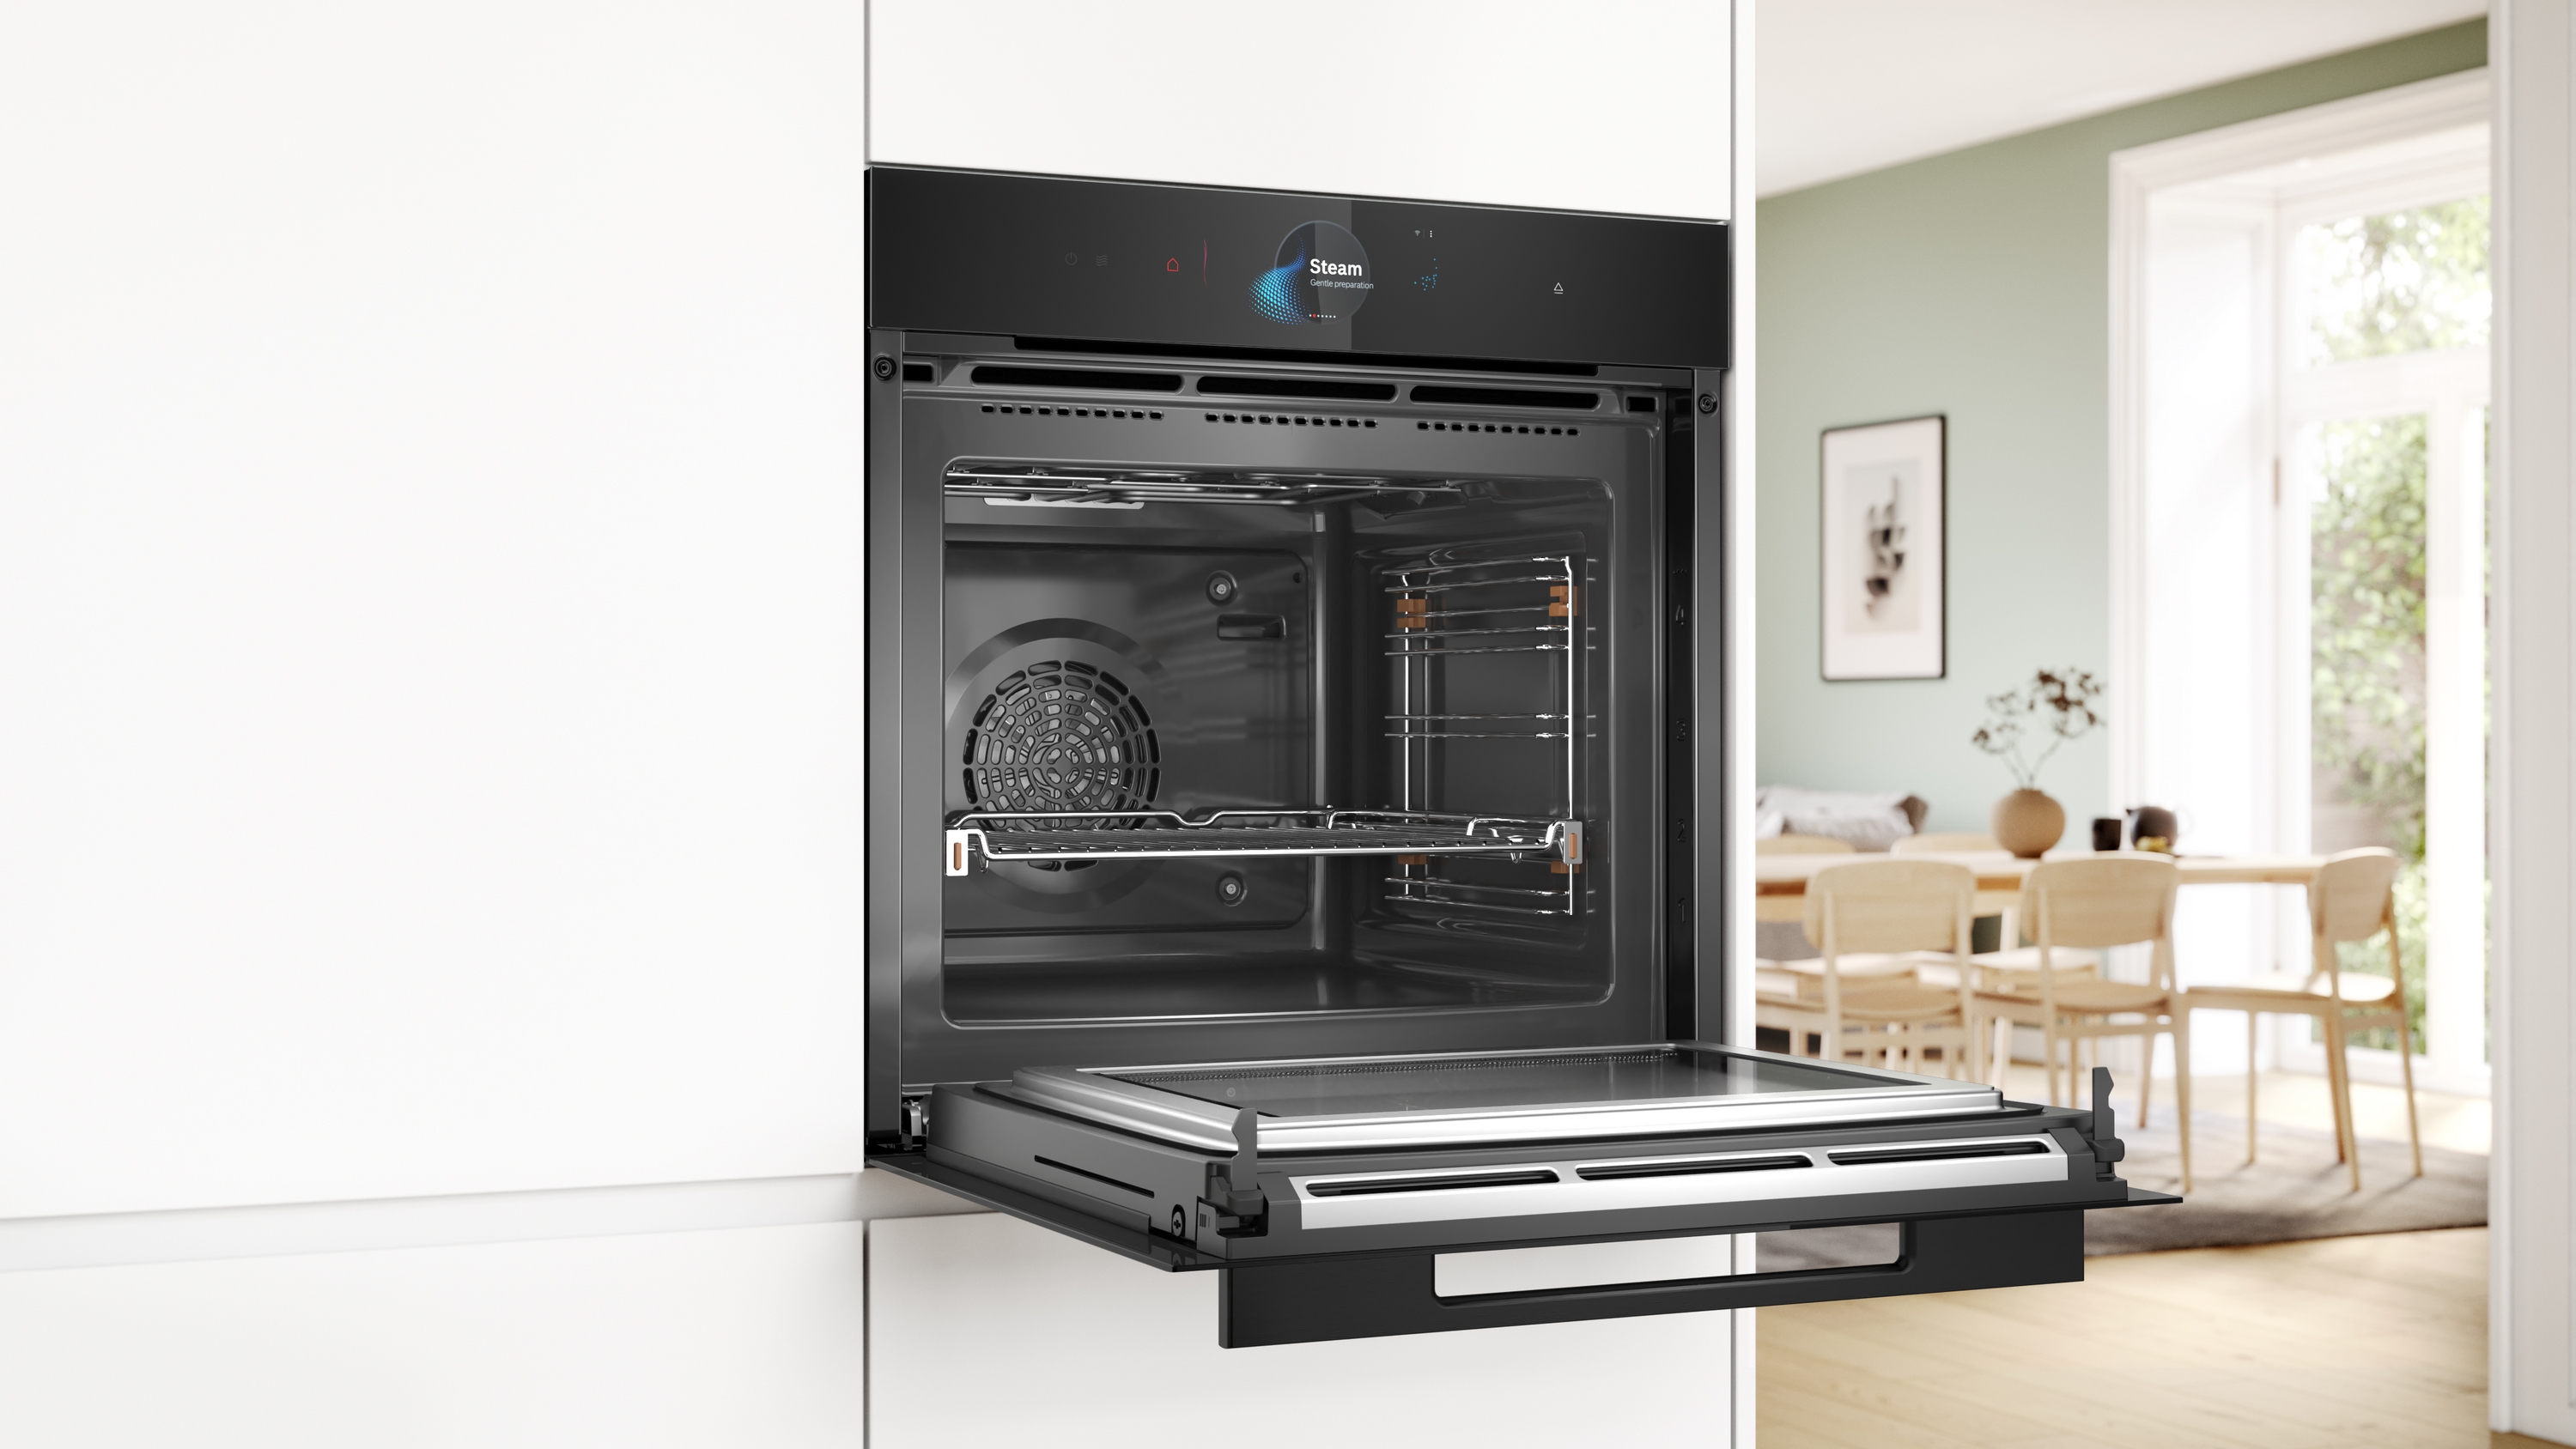 Series 8, Built-in oven with added steam and microwave function, 60 x 60 cm, Black, HNG978QB1